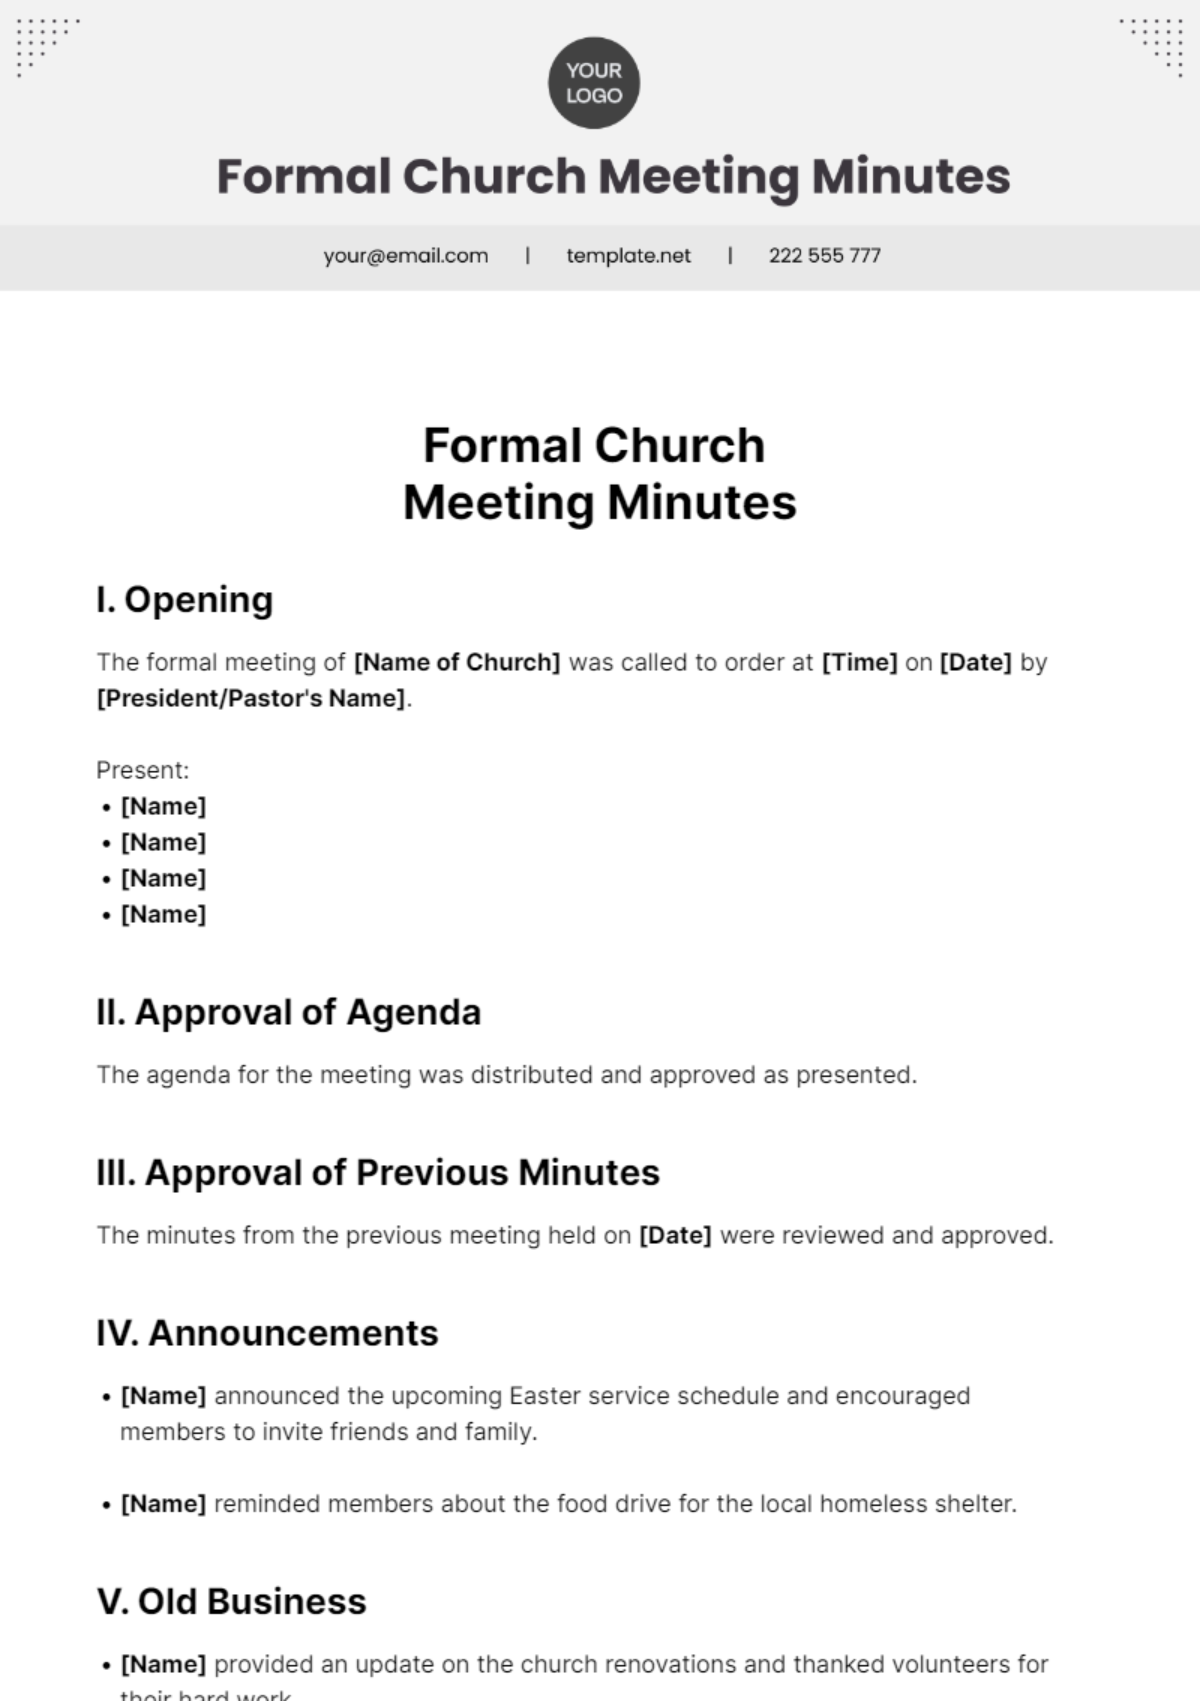 Formal Church Meeting Minutes Template